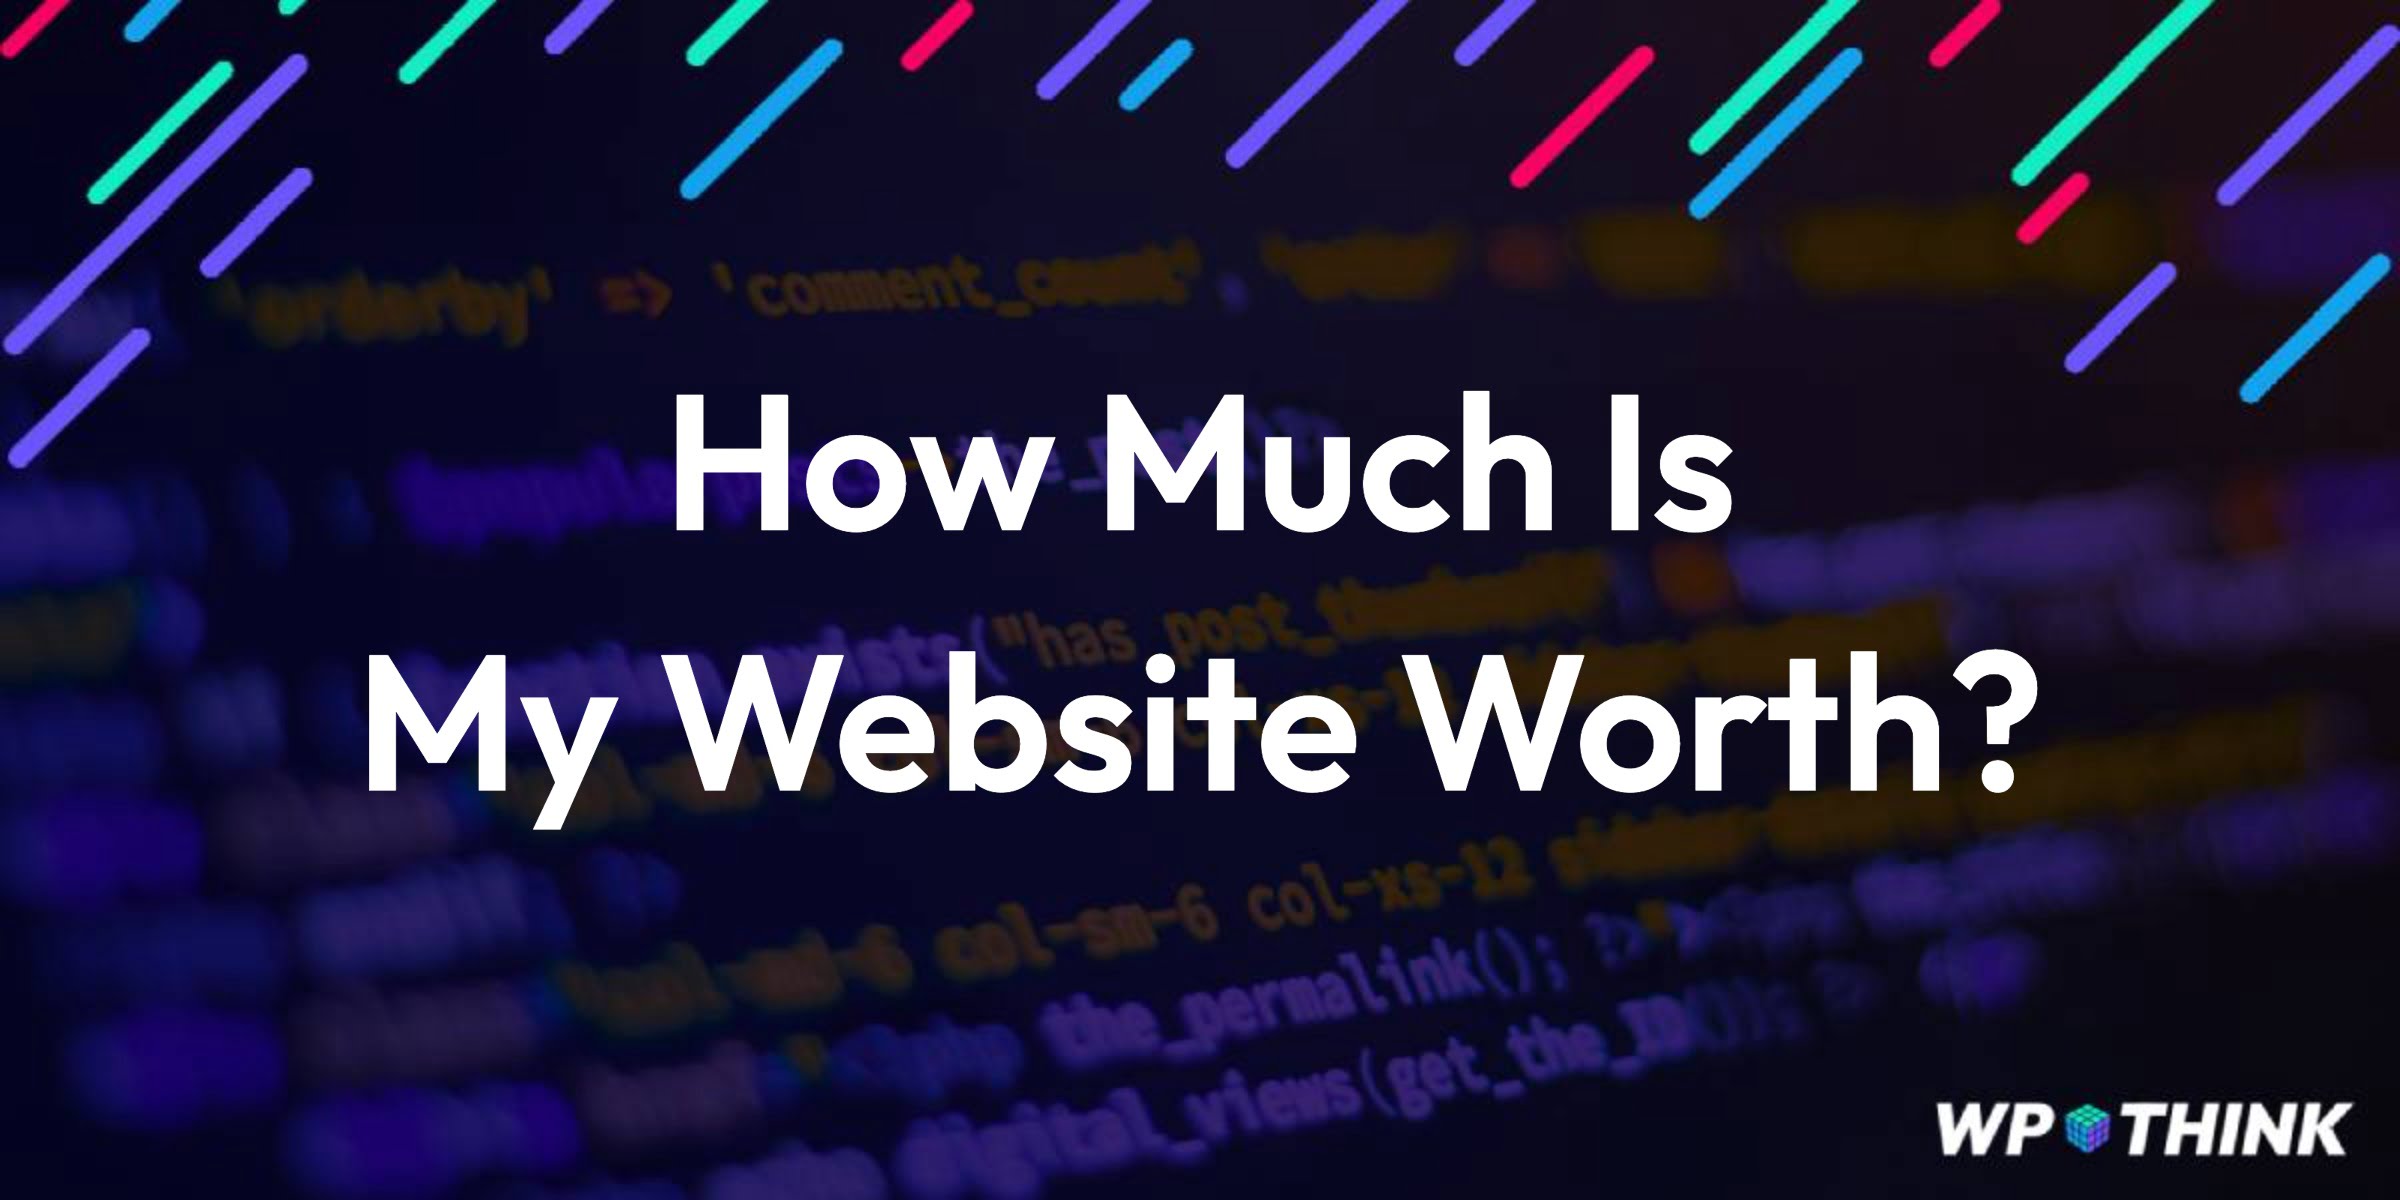 How Much Is My Website Worth?